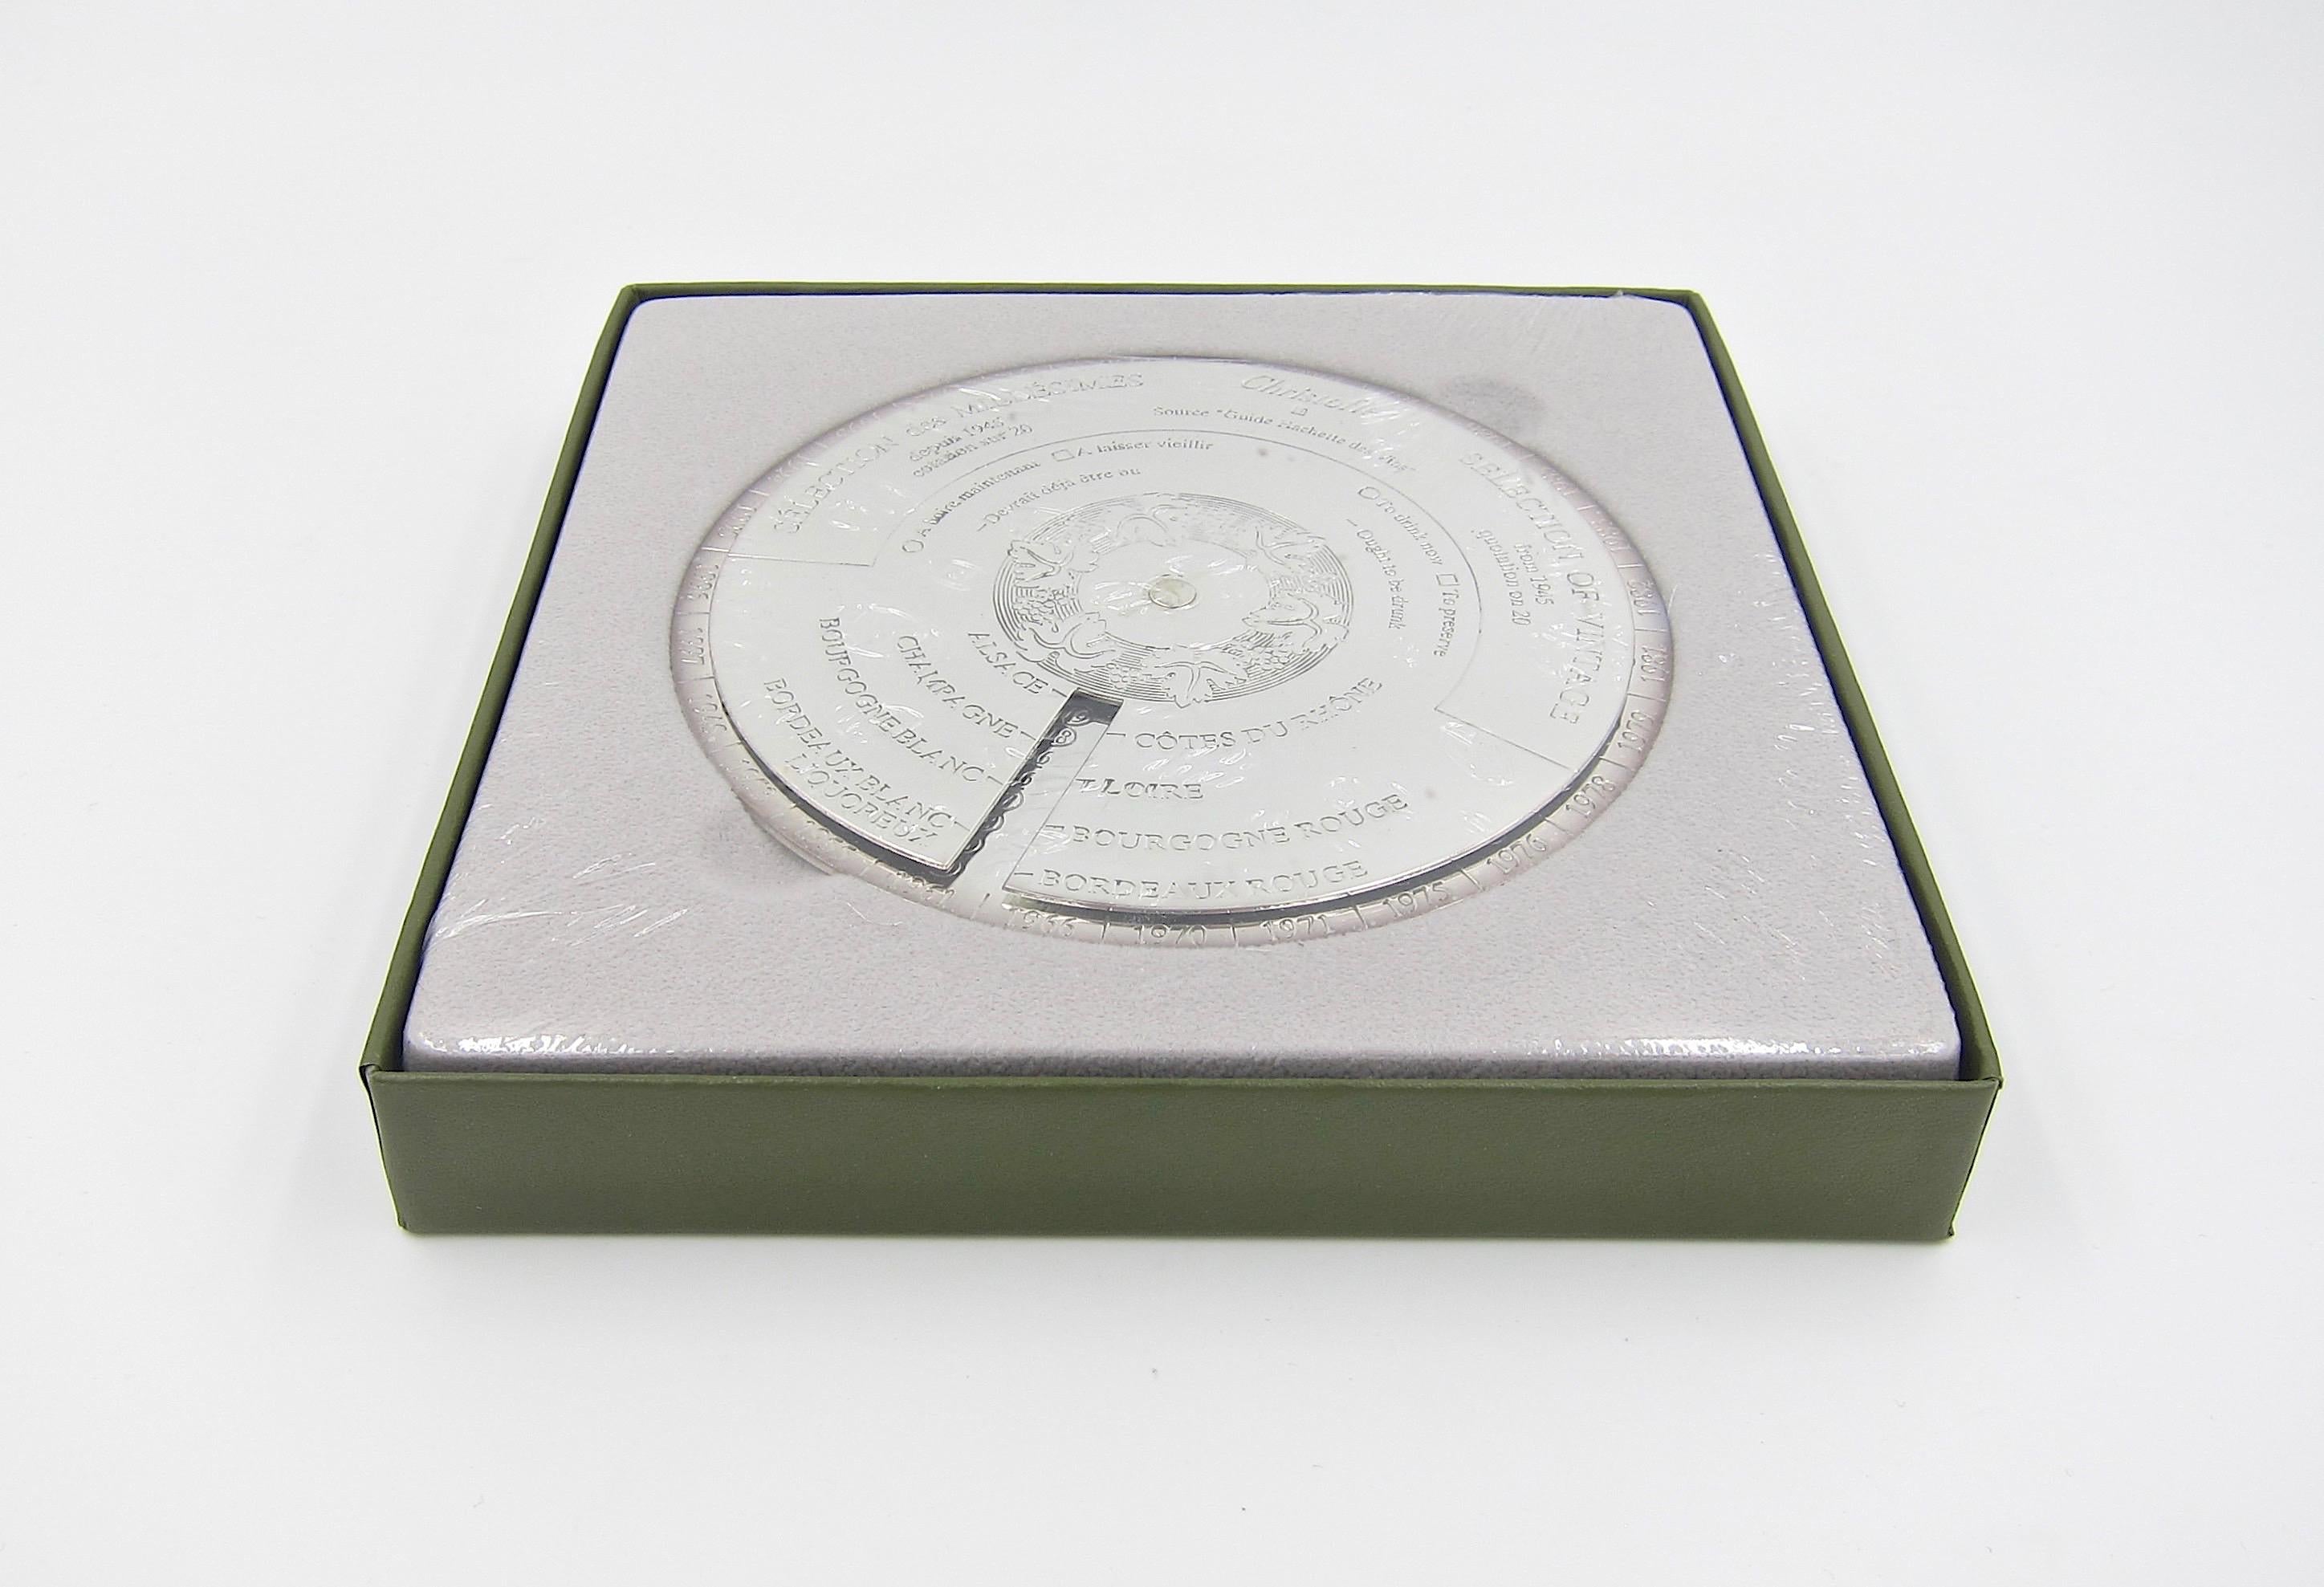 A Christofle of Paris Vinea Dessous de Carafe wine bottle coaster sealed in its original fitted box. Designed as a guide (or cheat sheet) for the true oenophile with an adjustable upper disk that rotates to reflect a 1 through 20 rating from 